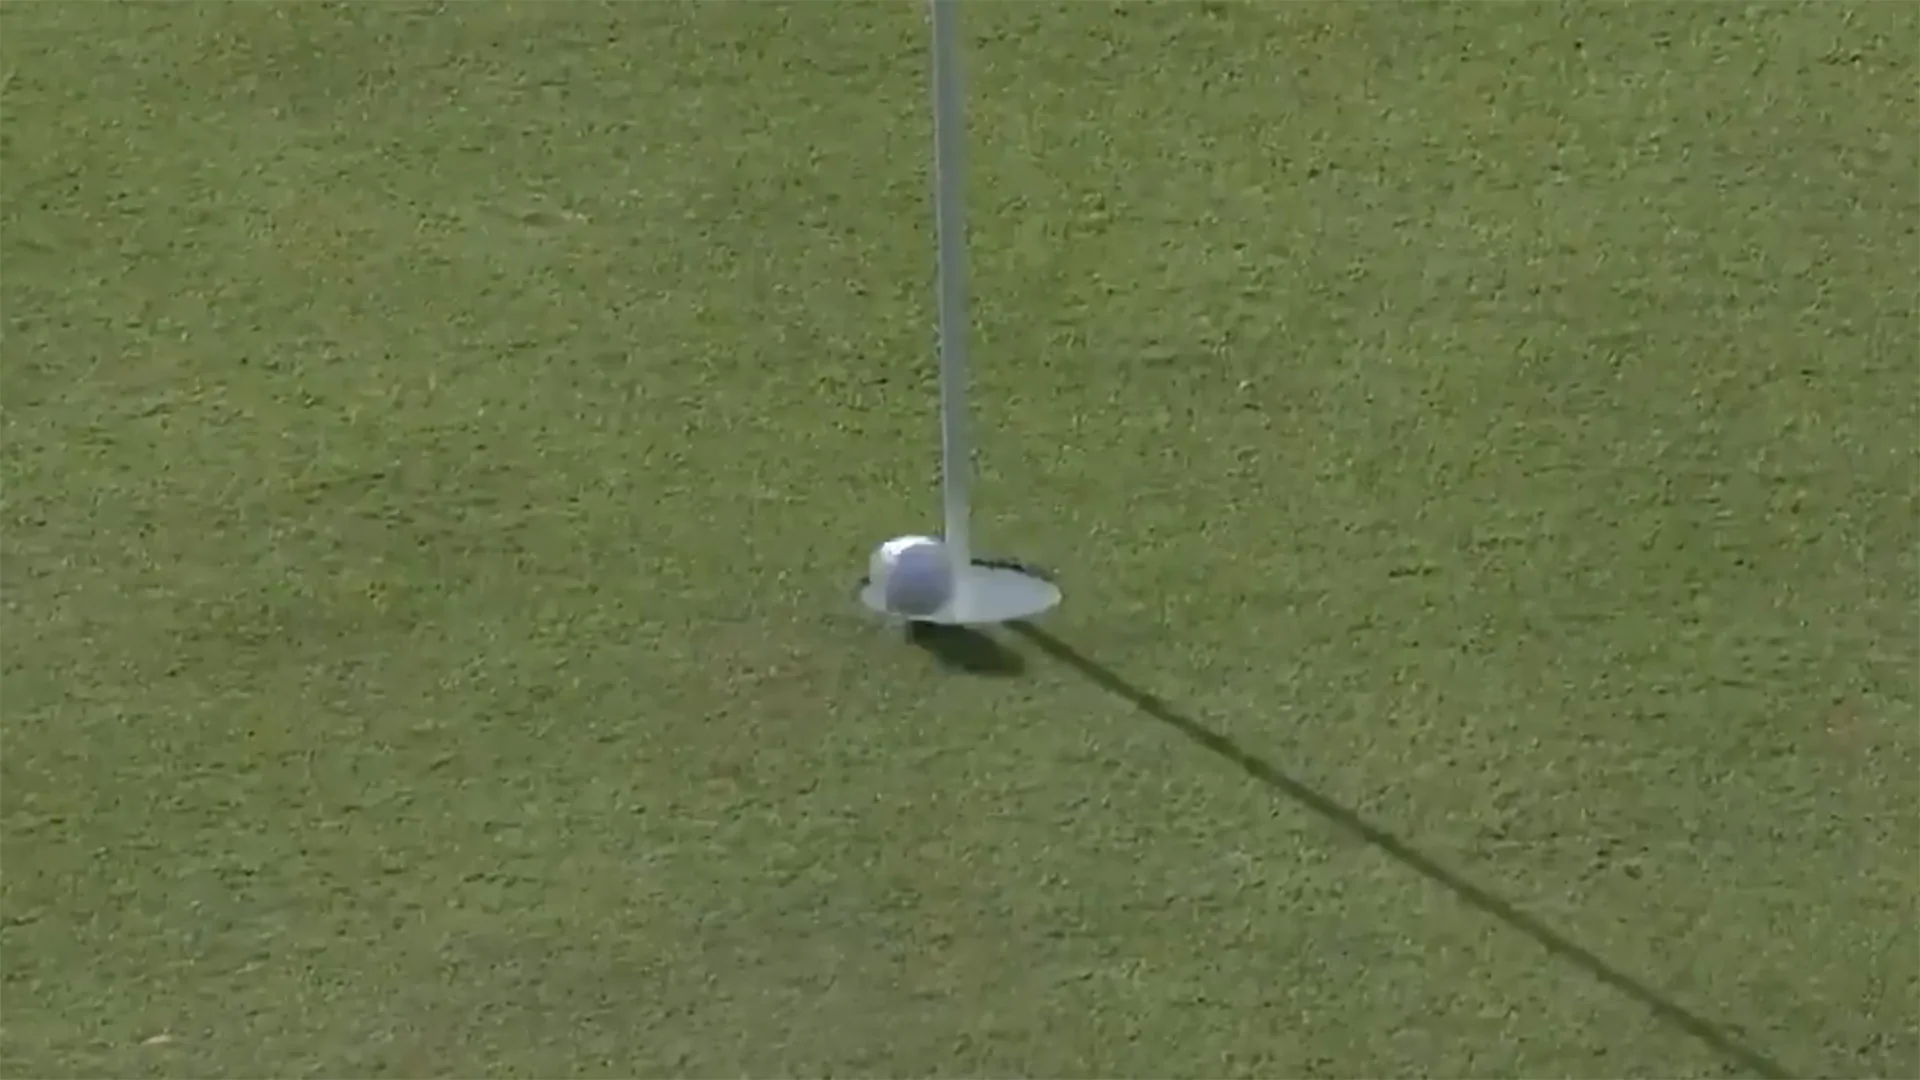 Watch: McCarthy robbed of an ace by brutal lipout